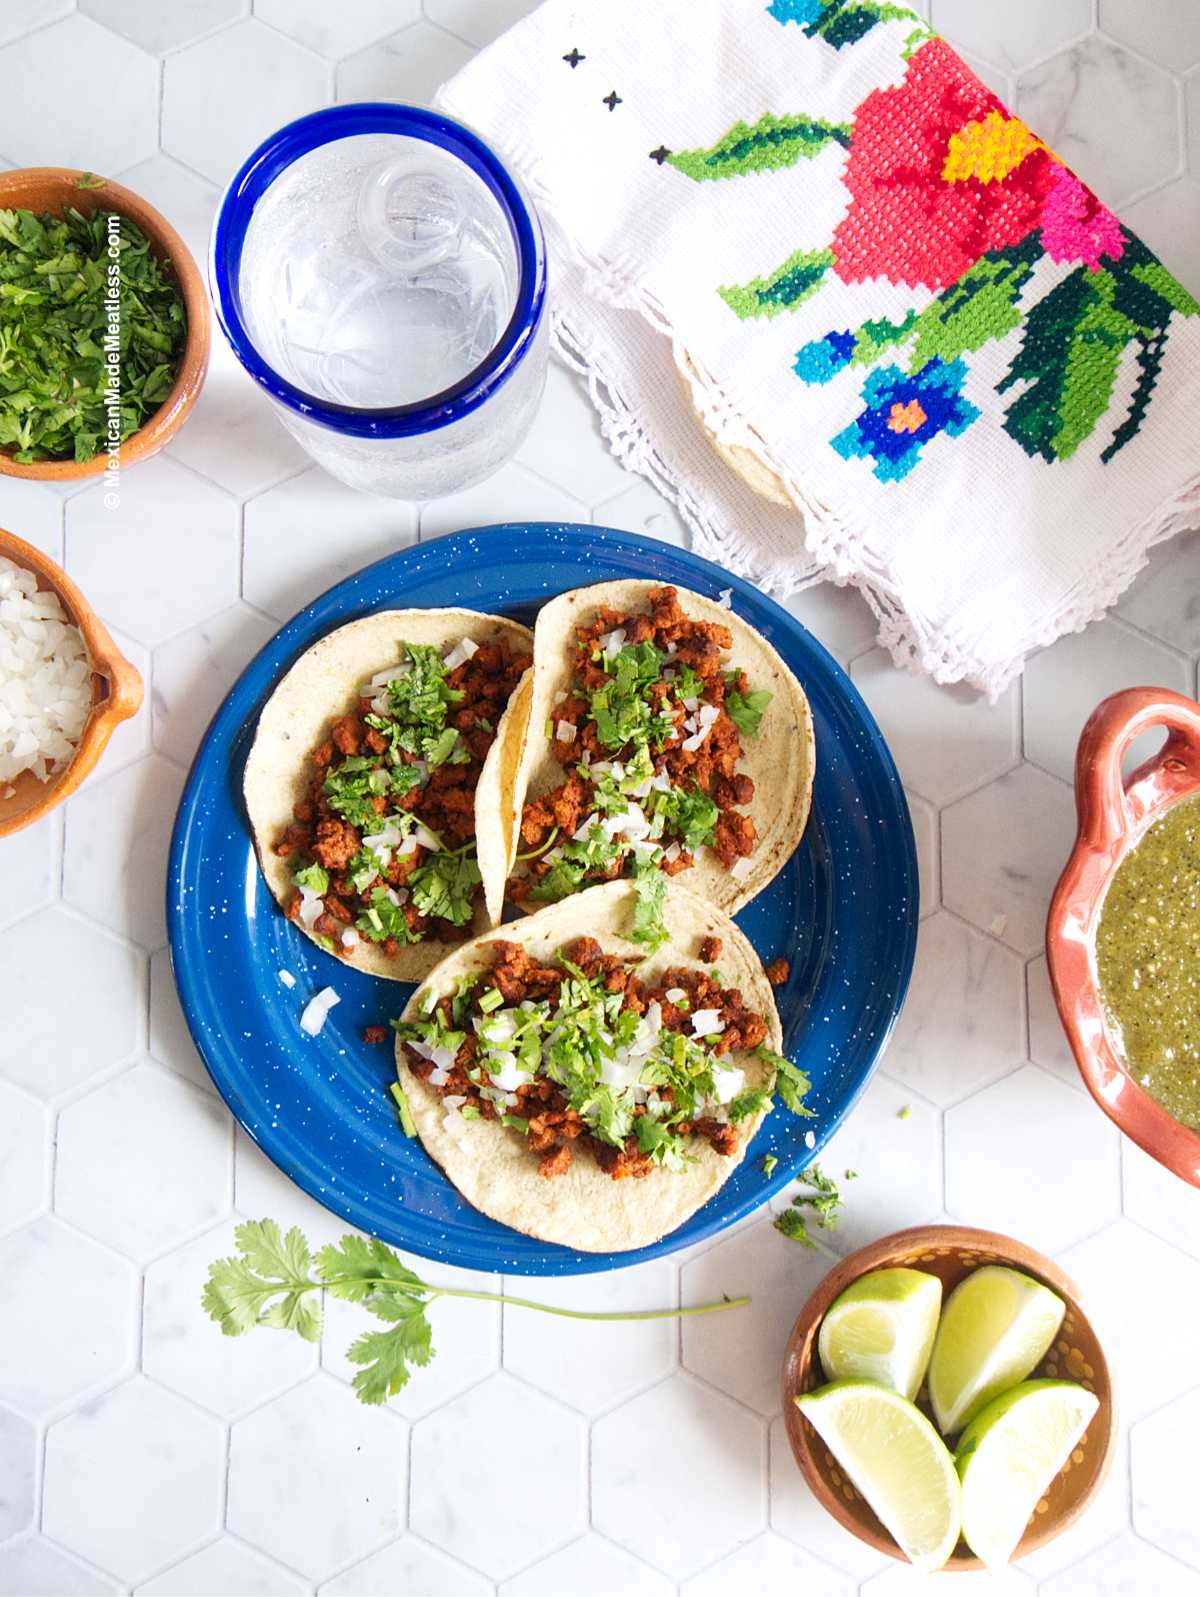 A blue plate with three vegan chorizo tacos topped with chopped onion and cilantro. On the side are quartered limes, salsa verde and a glass of water.